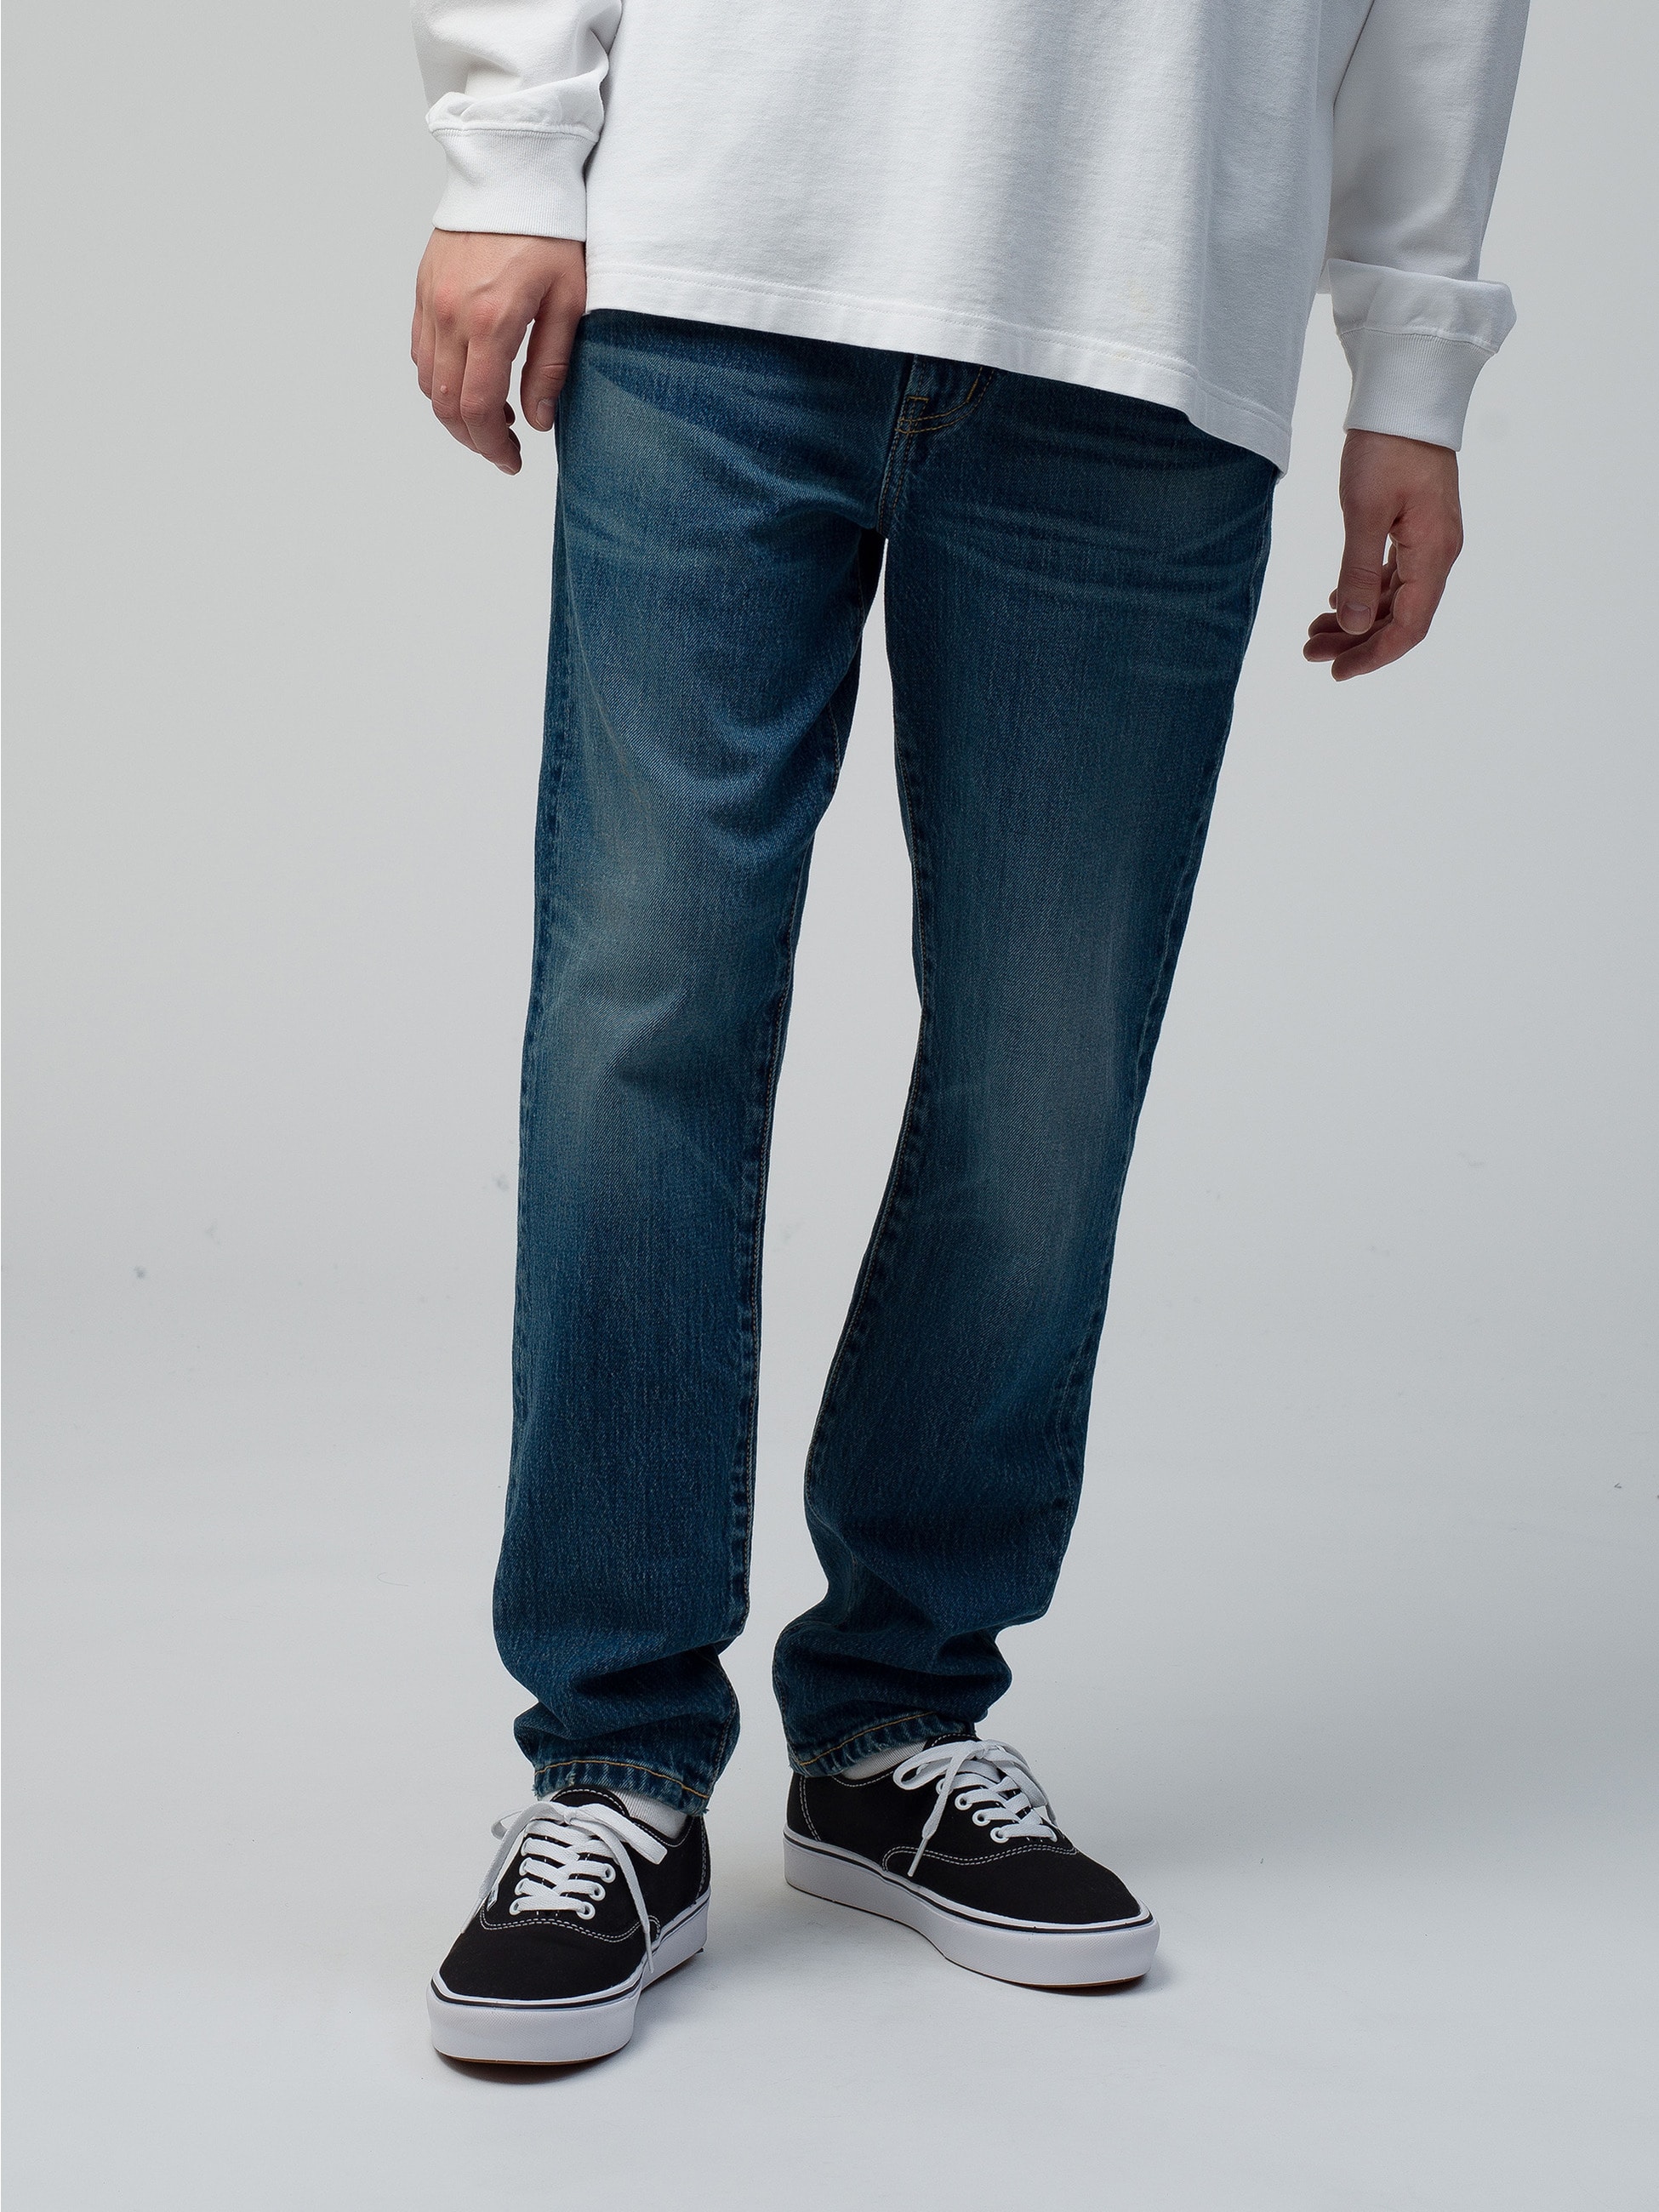 Drifter Tapered Fit Denim Pants｜OUTERKNOWN(アウターノウン)｜Ron 